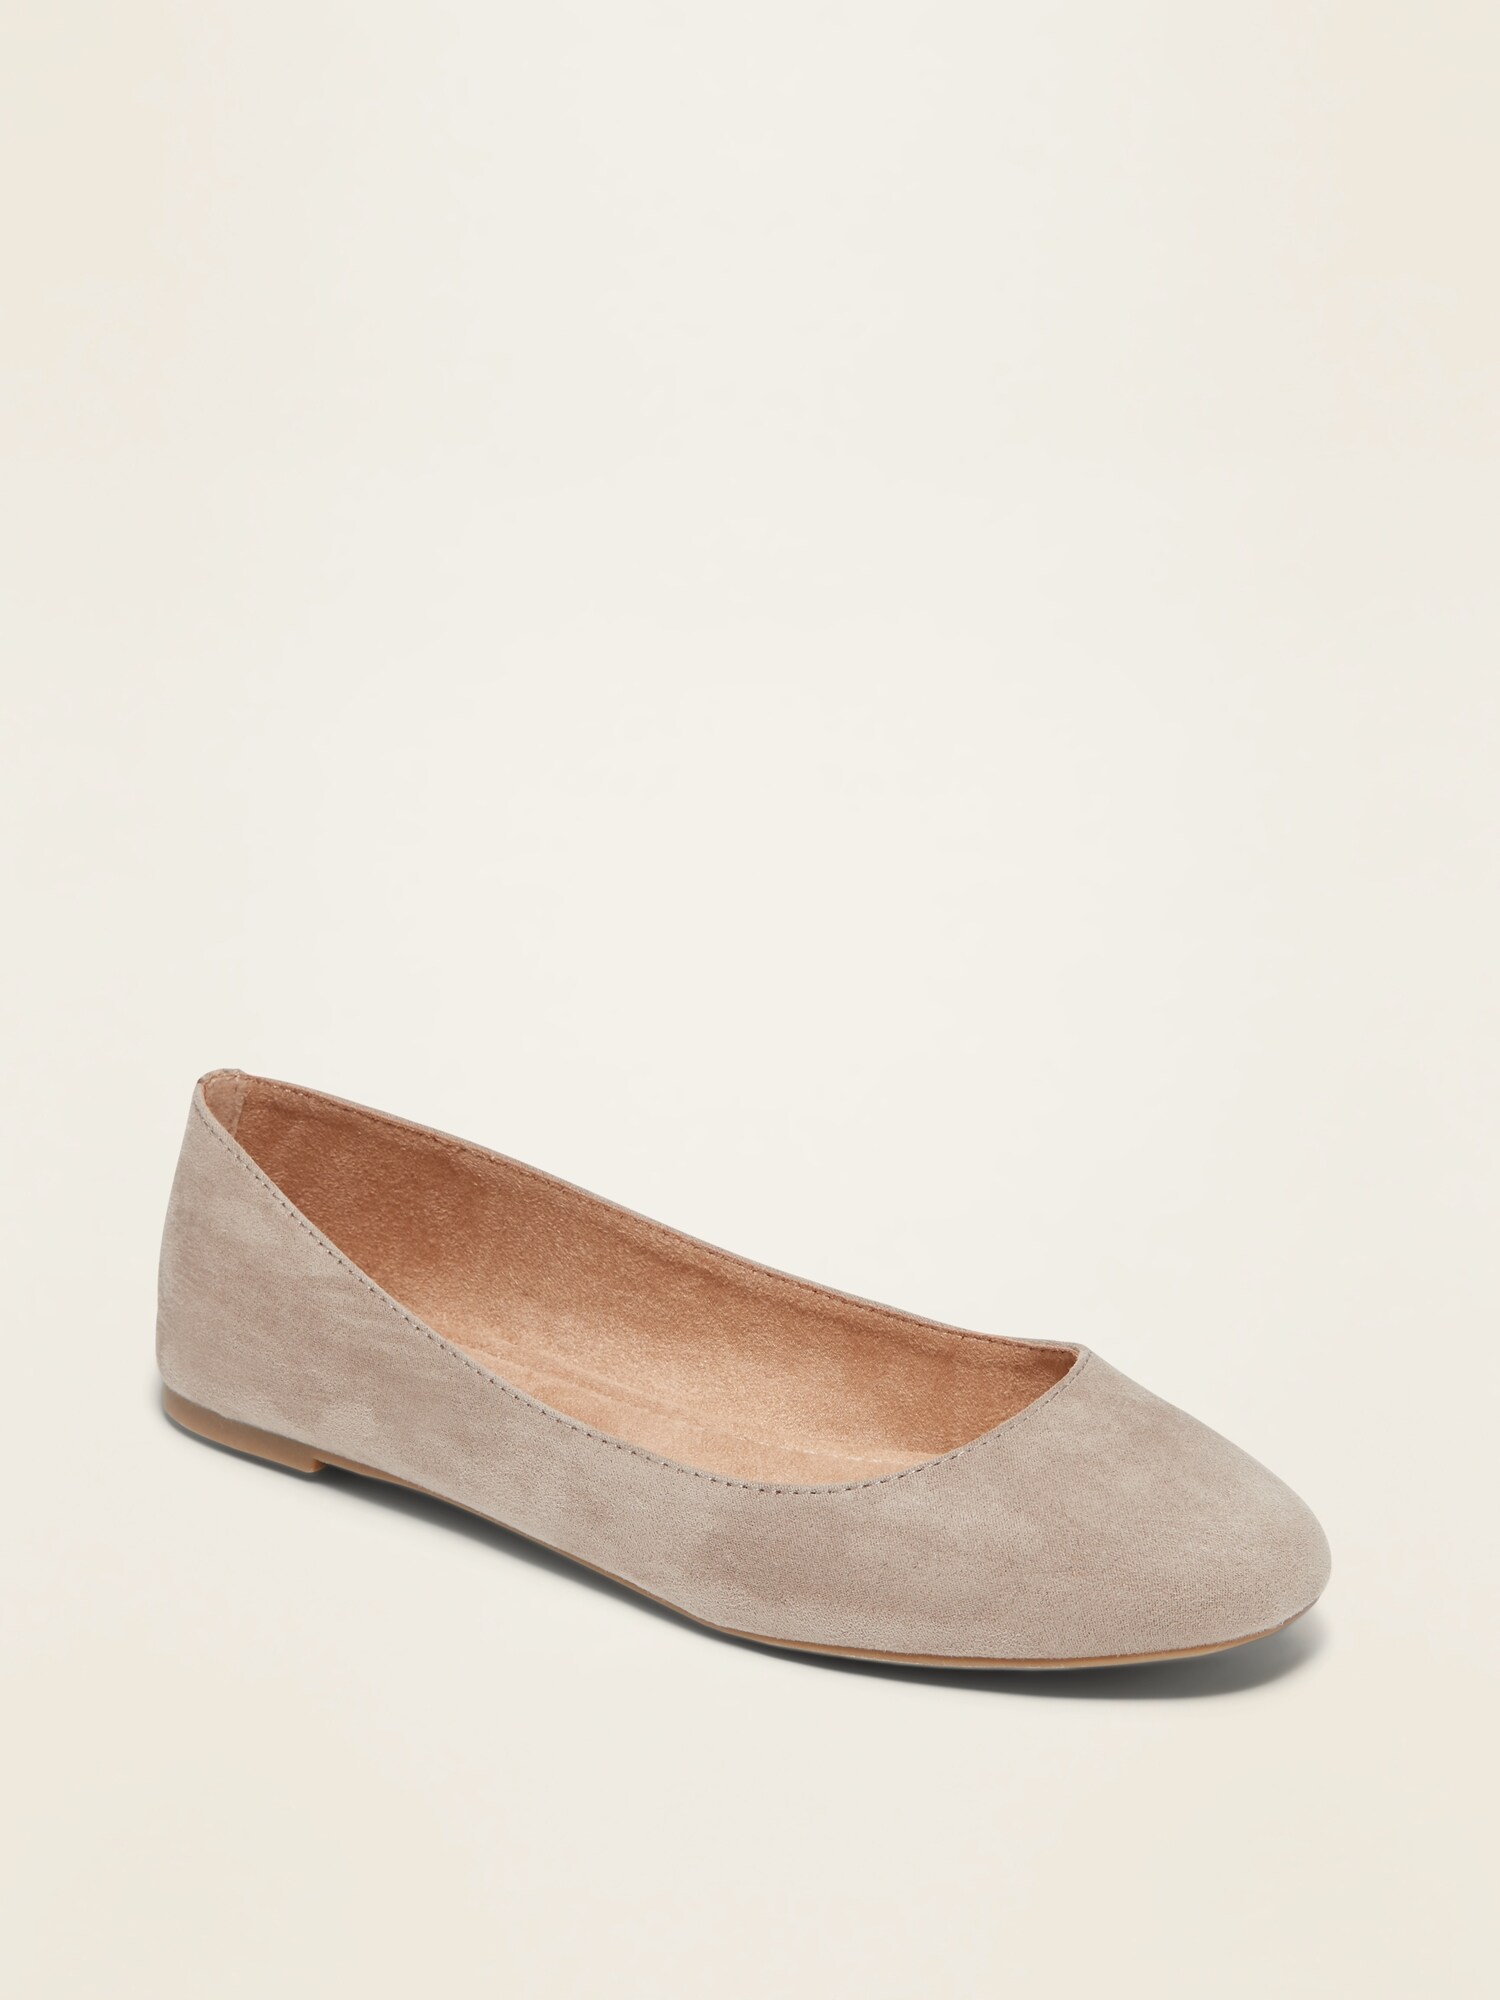 old navy pointed toe flats